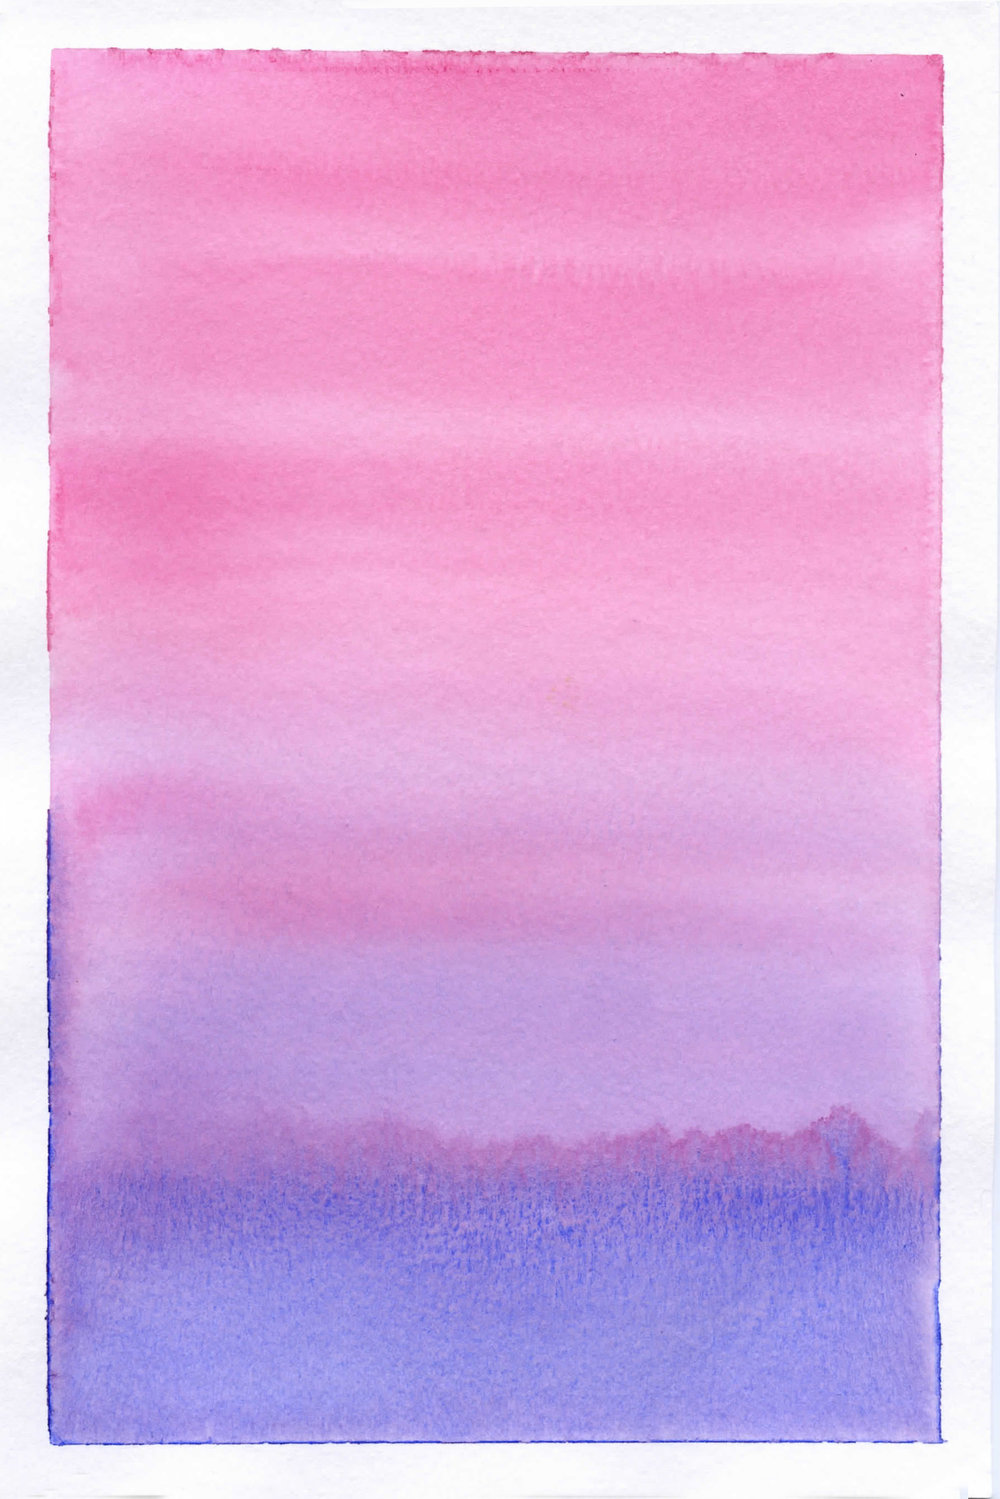 Gradient Watercolor Background Experiments | Susan Chiang